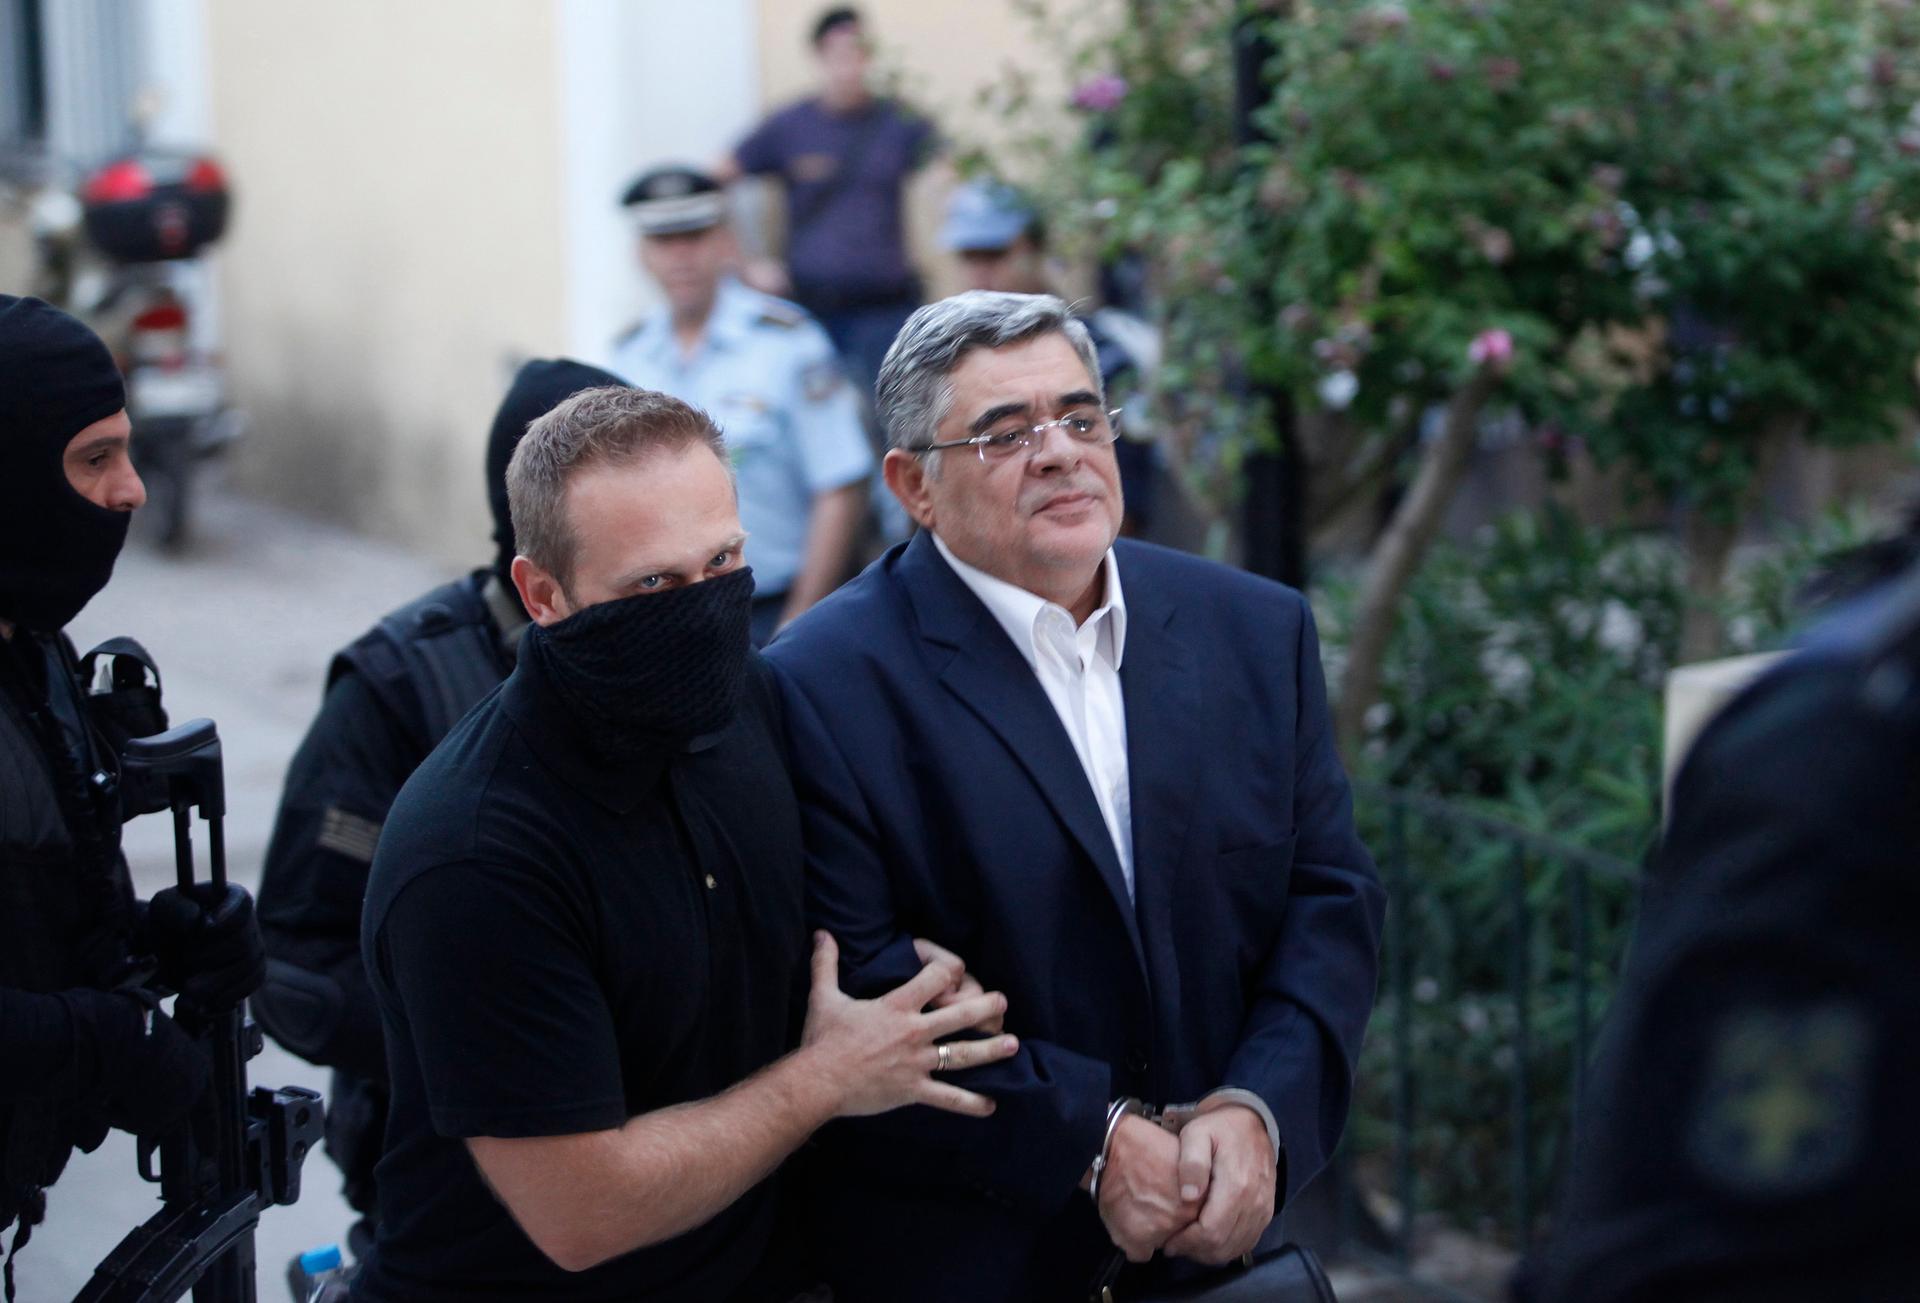 Far-right Golden Dawn party leader Nikos Mihaloliakos (R) is escorted by anti-terrorism police officers as he arrives at a courthouse in Athens September 28, 2013.